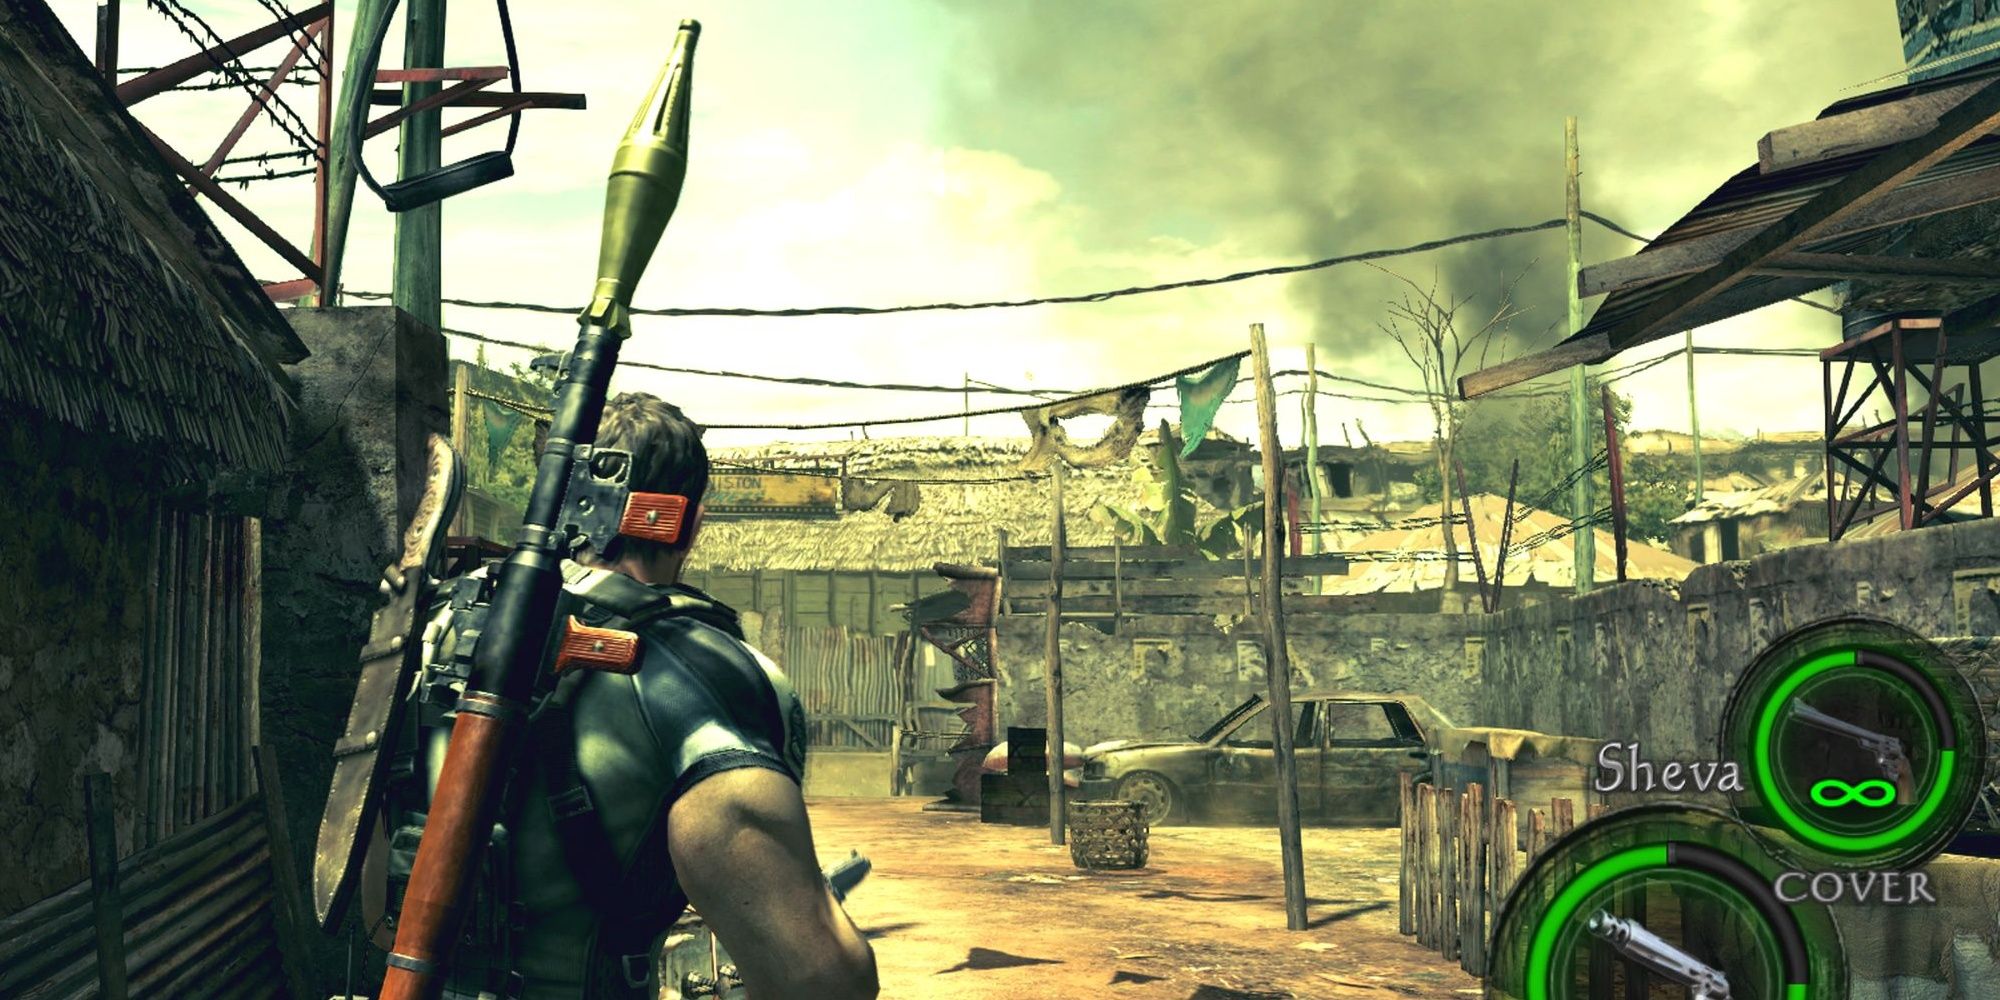 A screenshot from Resident Evil 5 showing off the green tint to it.